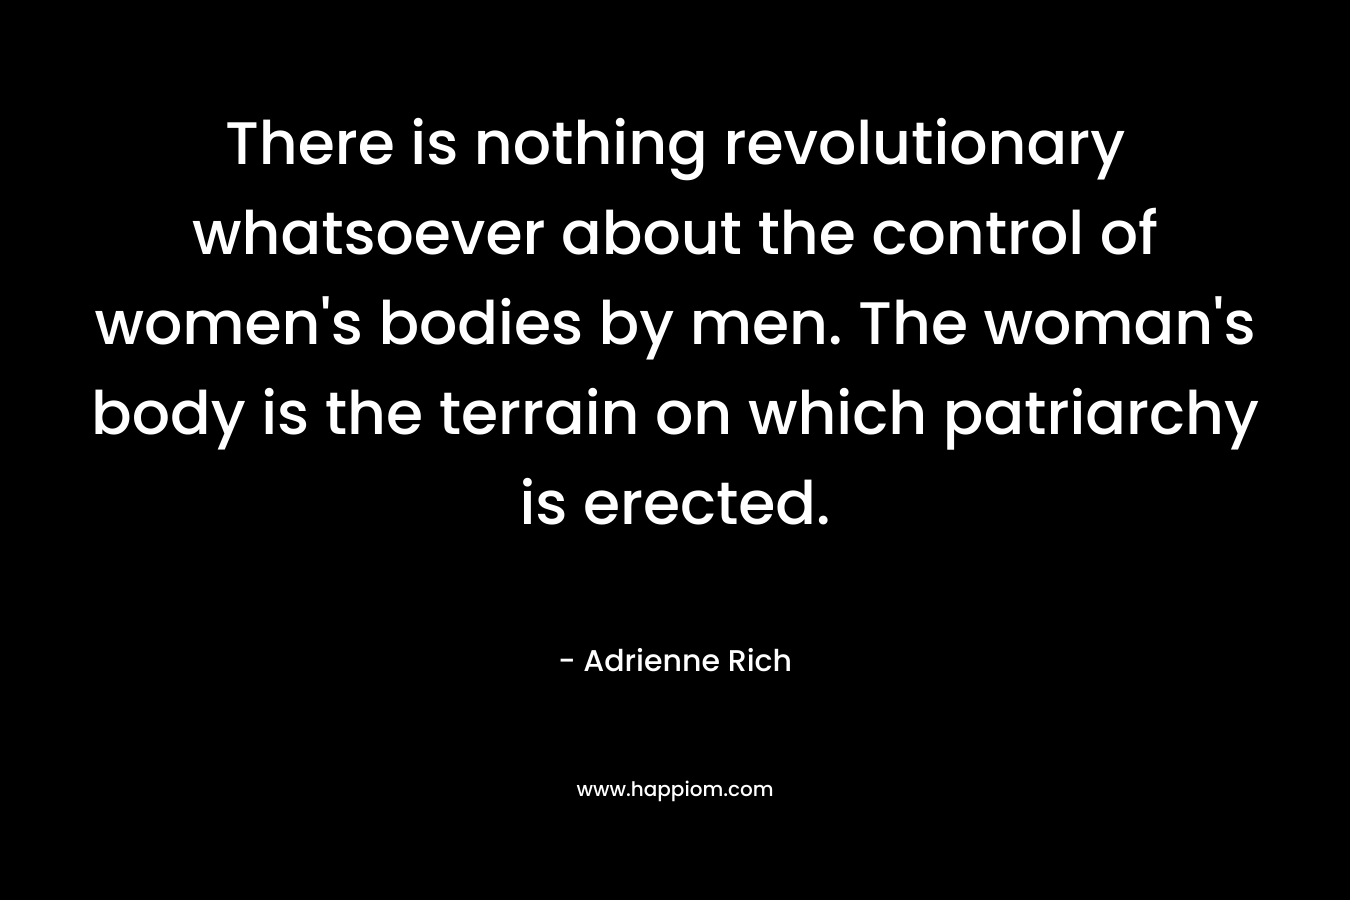 There is nothing revolutionary whatsoever about the control of women’s bodies by men. The woman’s body is the terrain on which patriarchy is erected. – Adrienne Rich